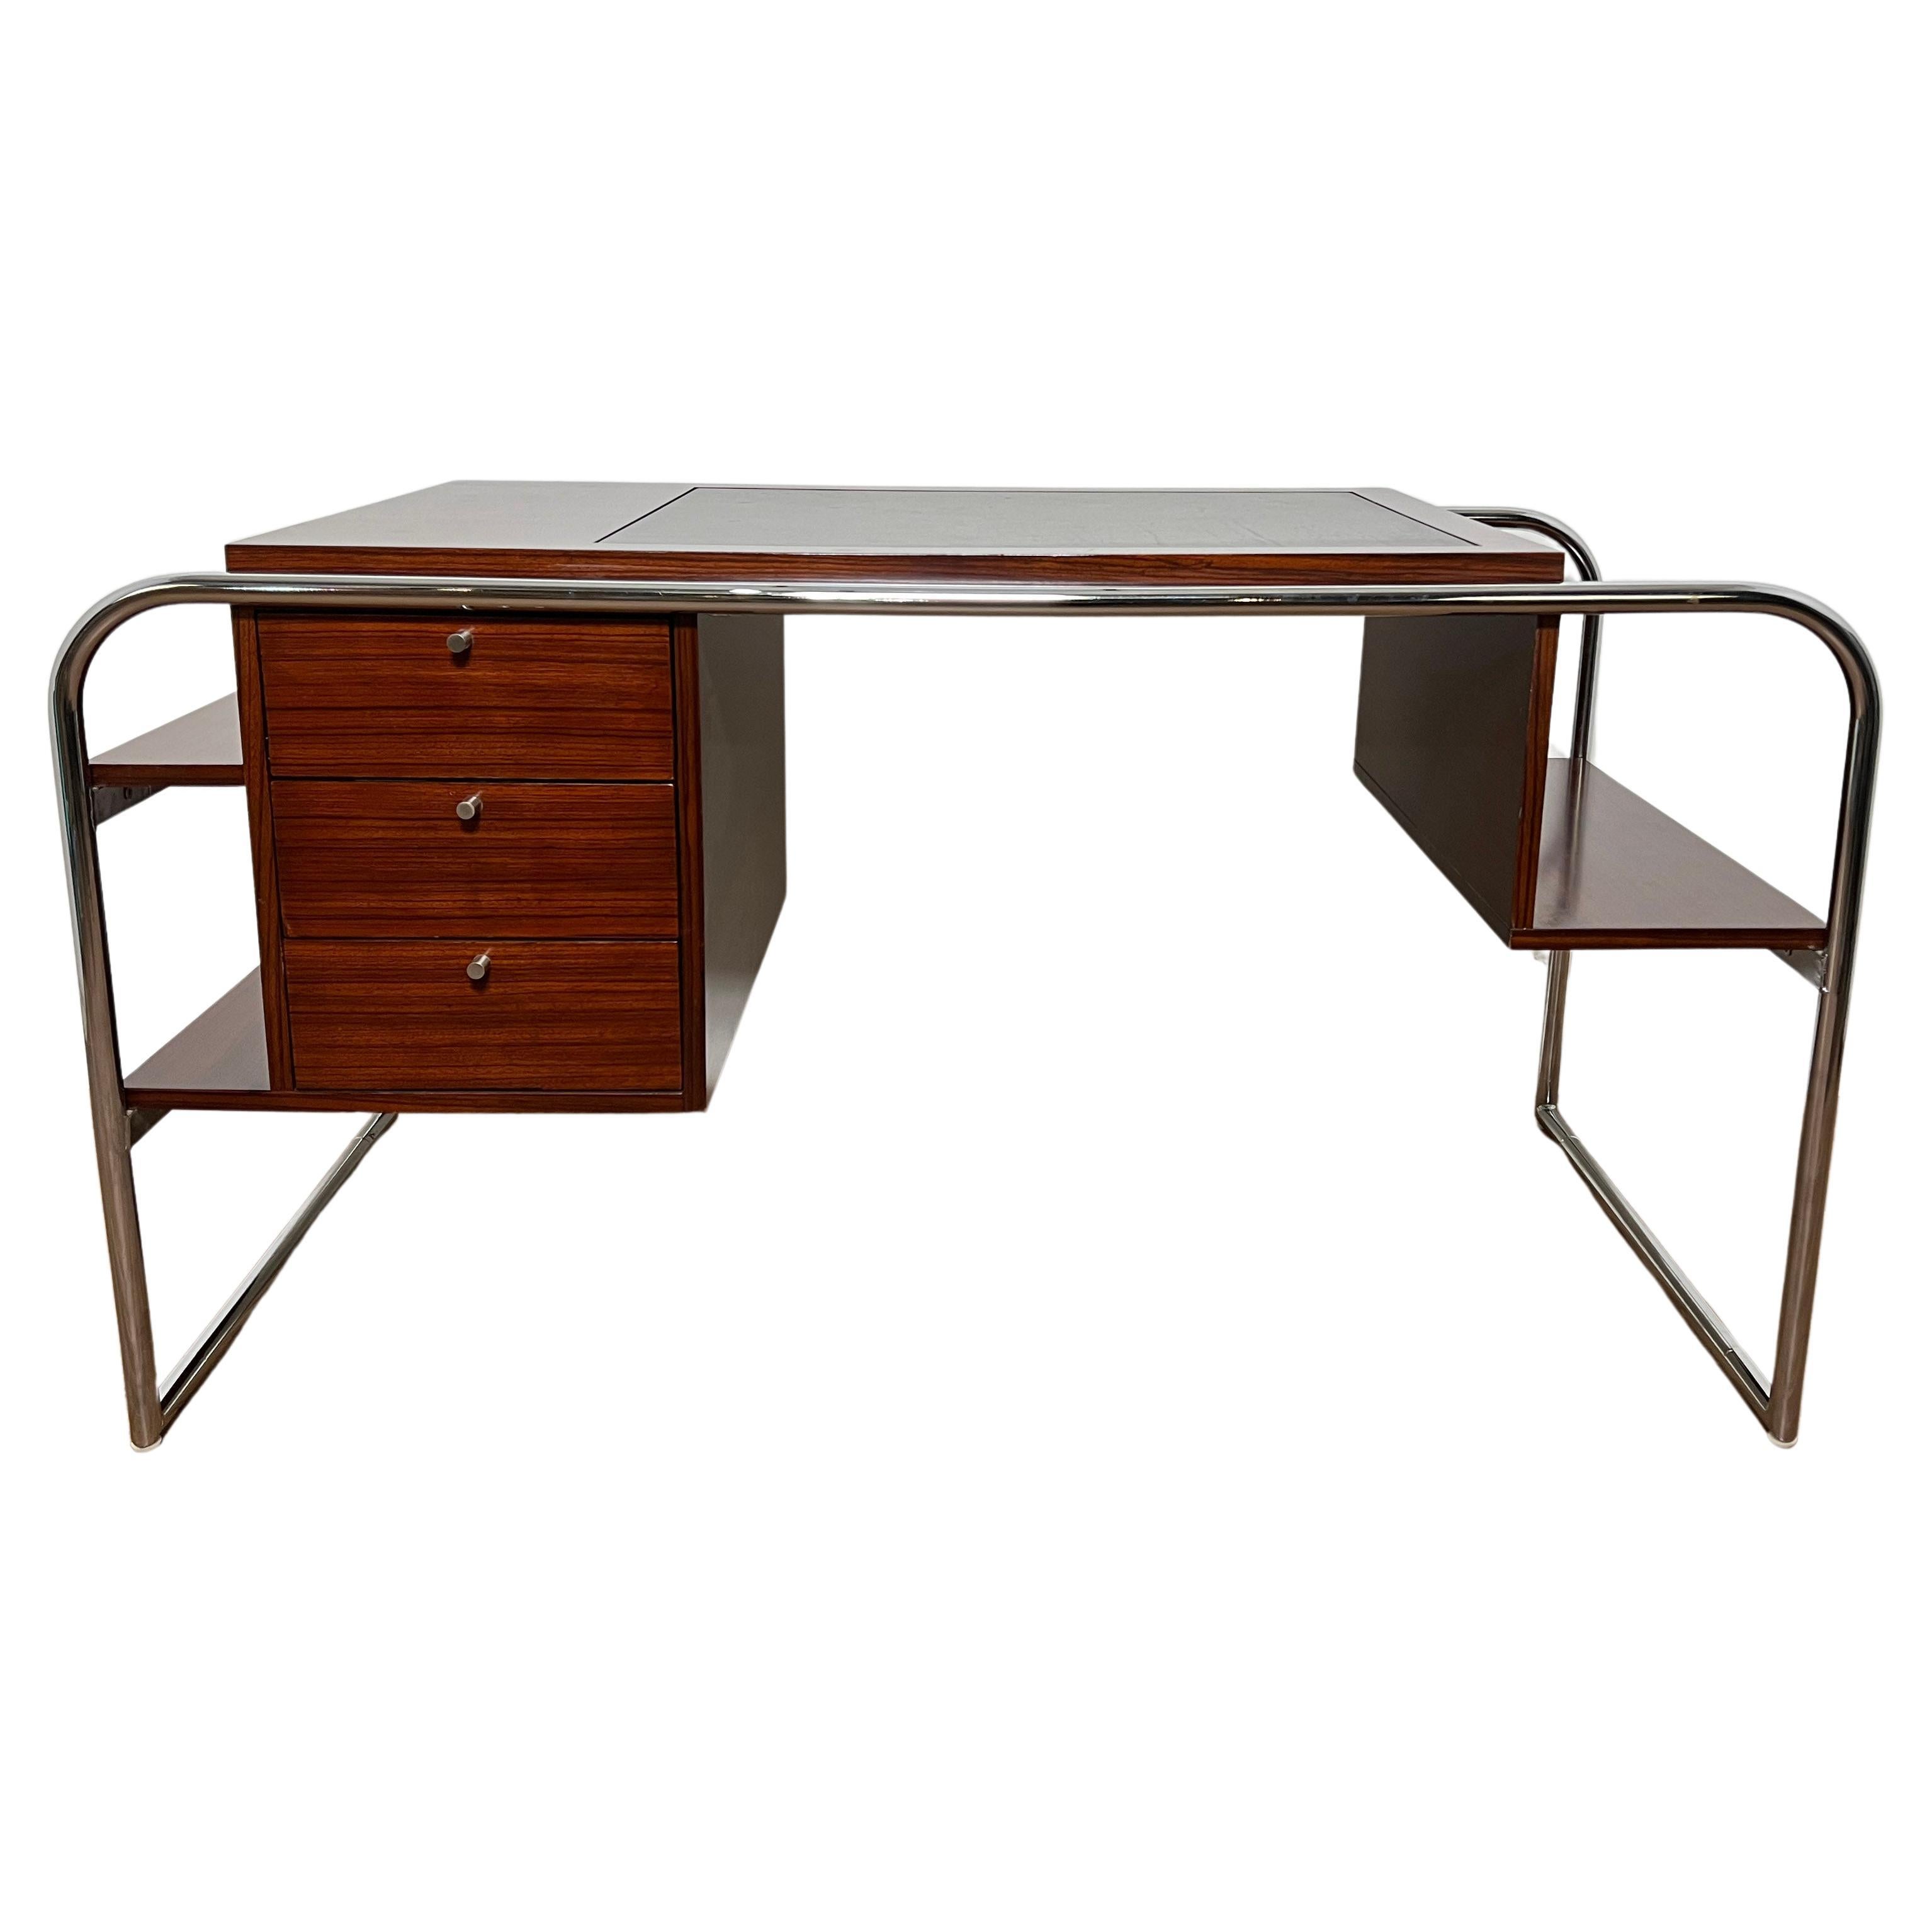 Ralph Lauren Bauhaus Inspired Desk in Rosewood, Chrome and Leather For Sale